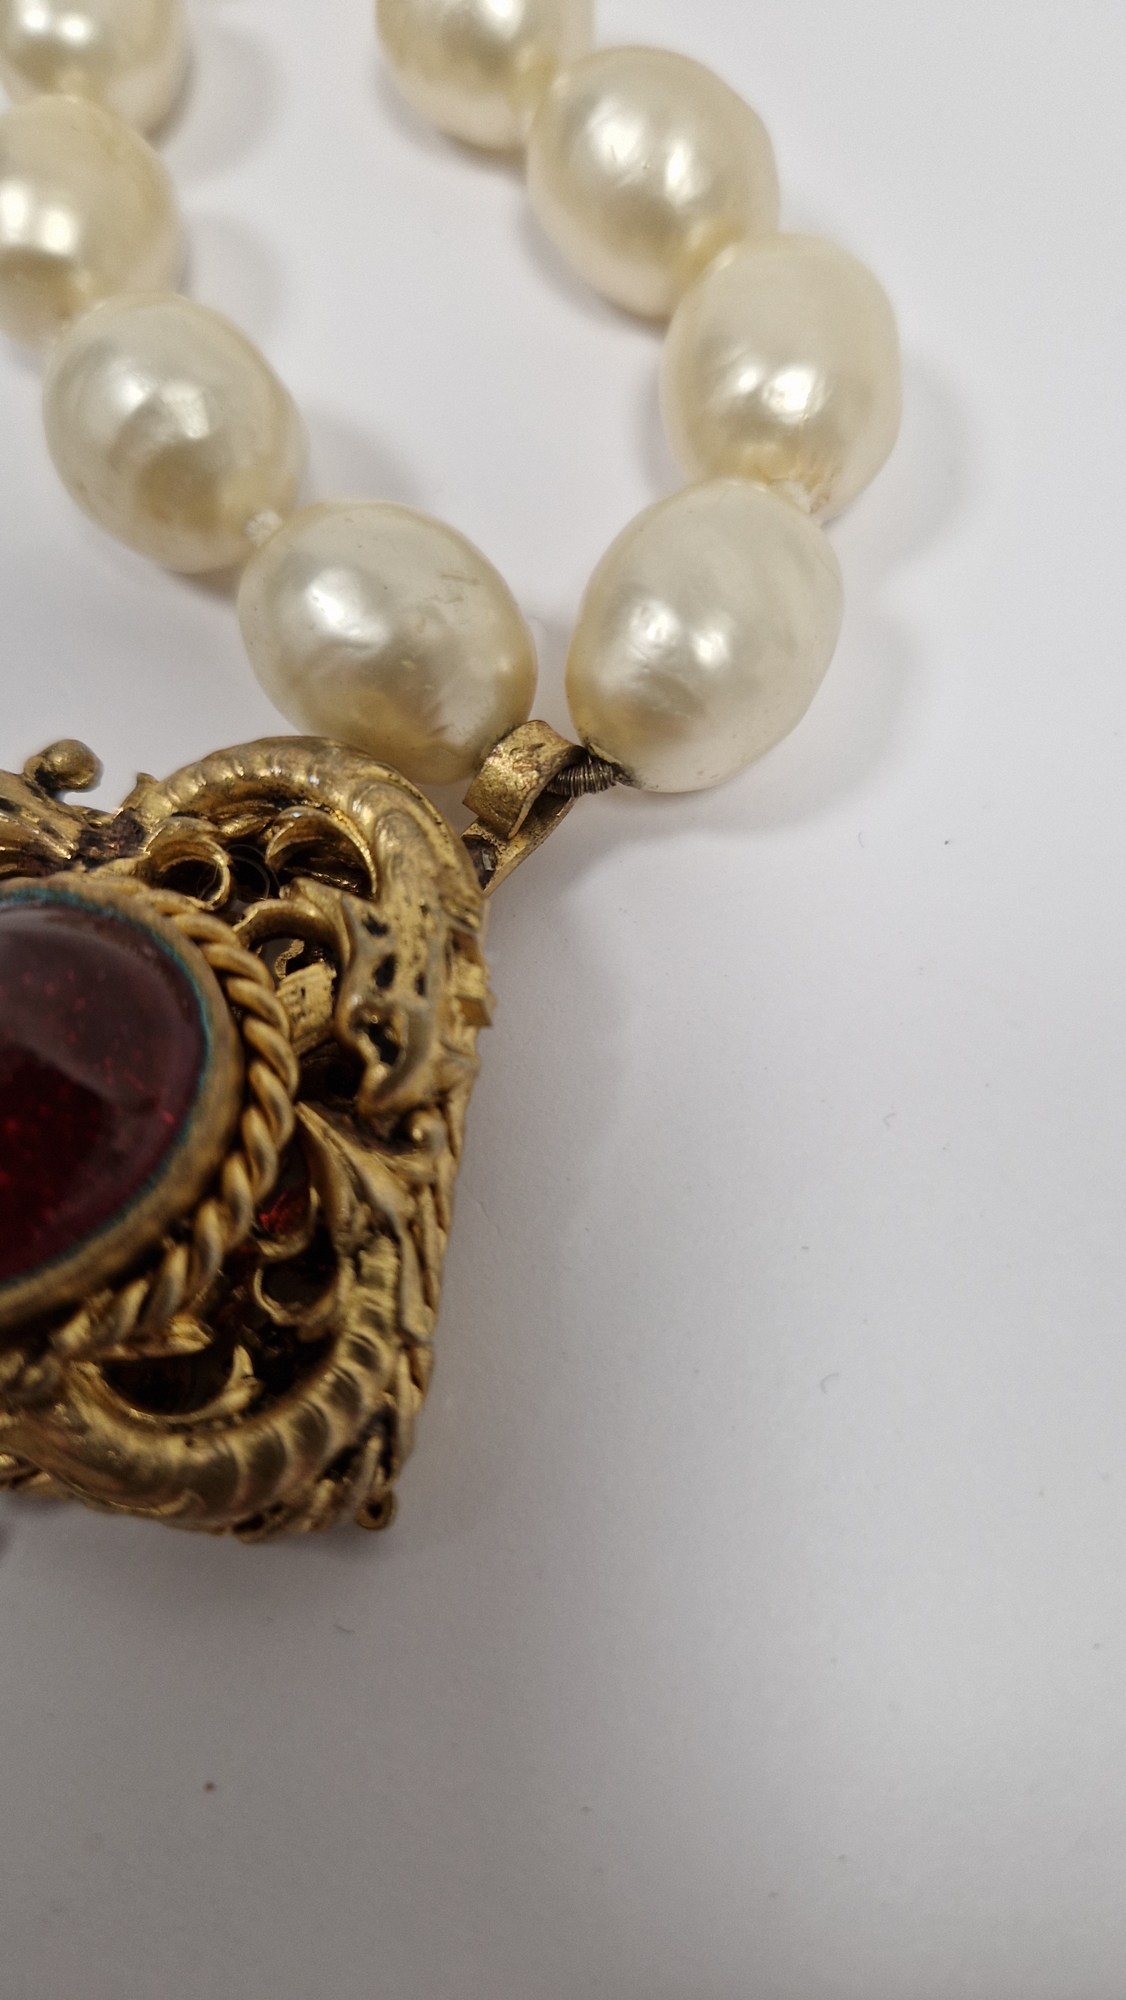 1980's Chanel simulated blister pearl and garnet choker necklace, formed of large oval faux pearl - Image 10 of 18